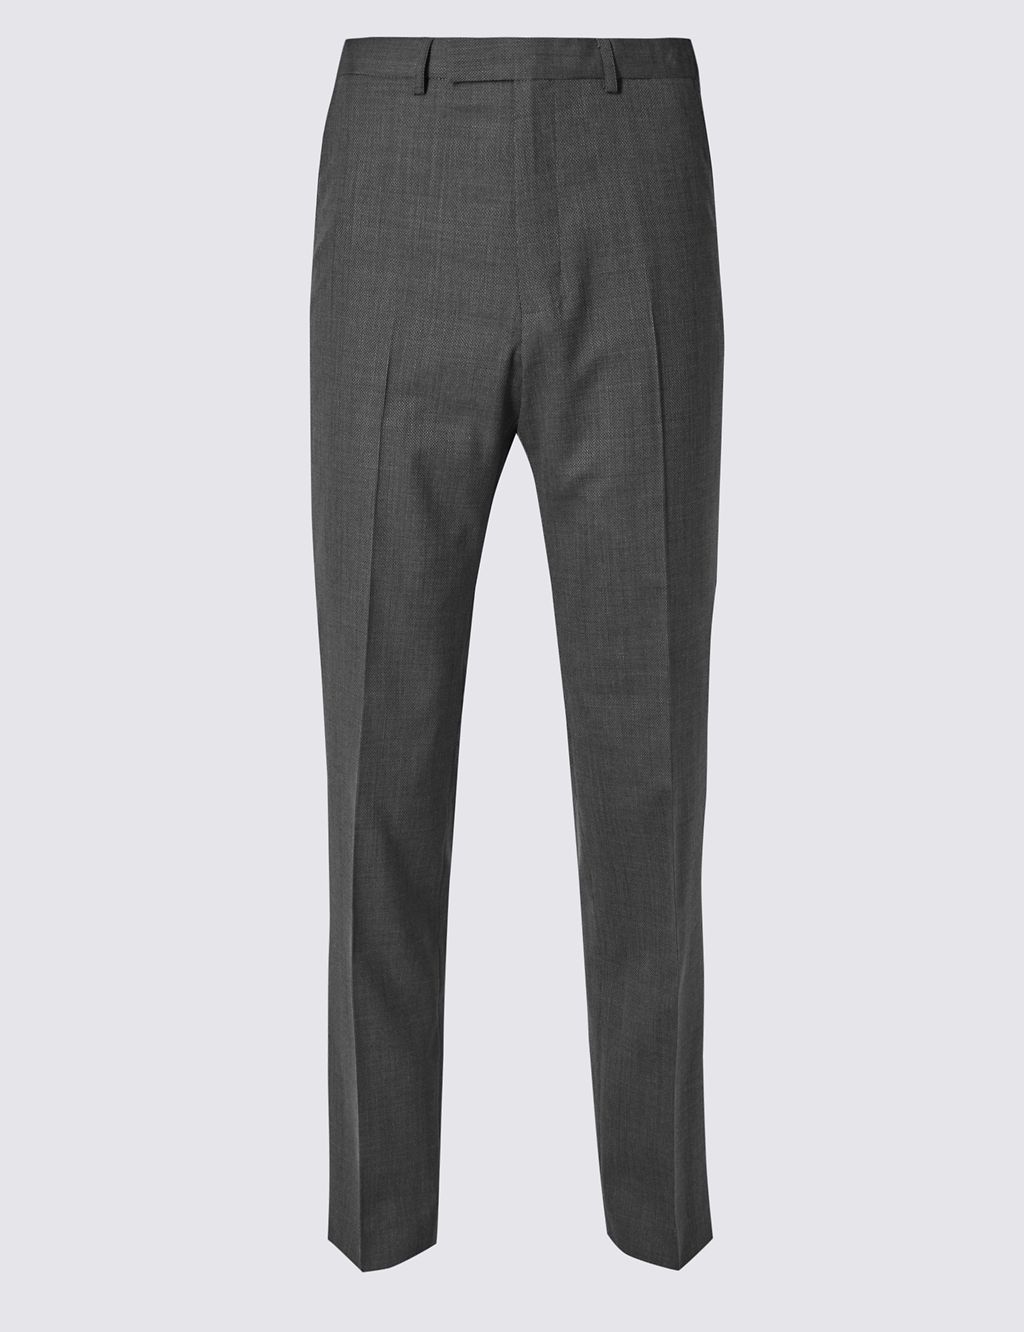 Grey Textured Regular Fit Trousers 1 of 4